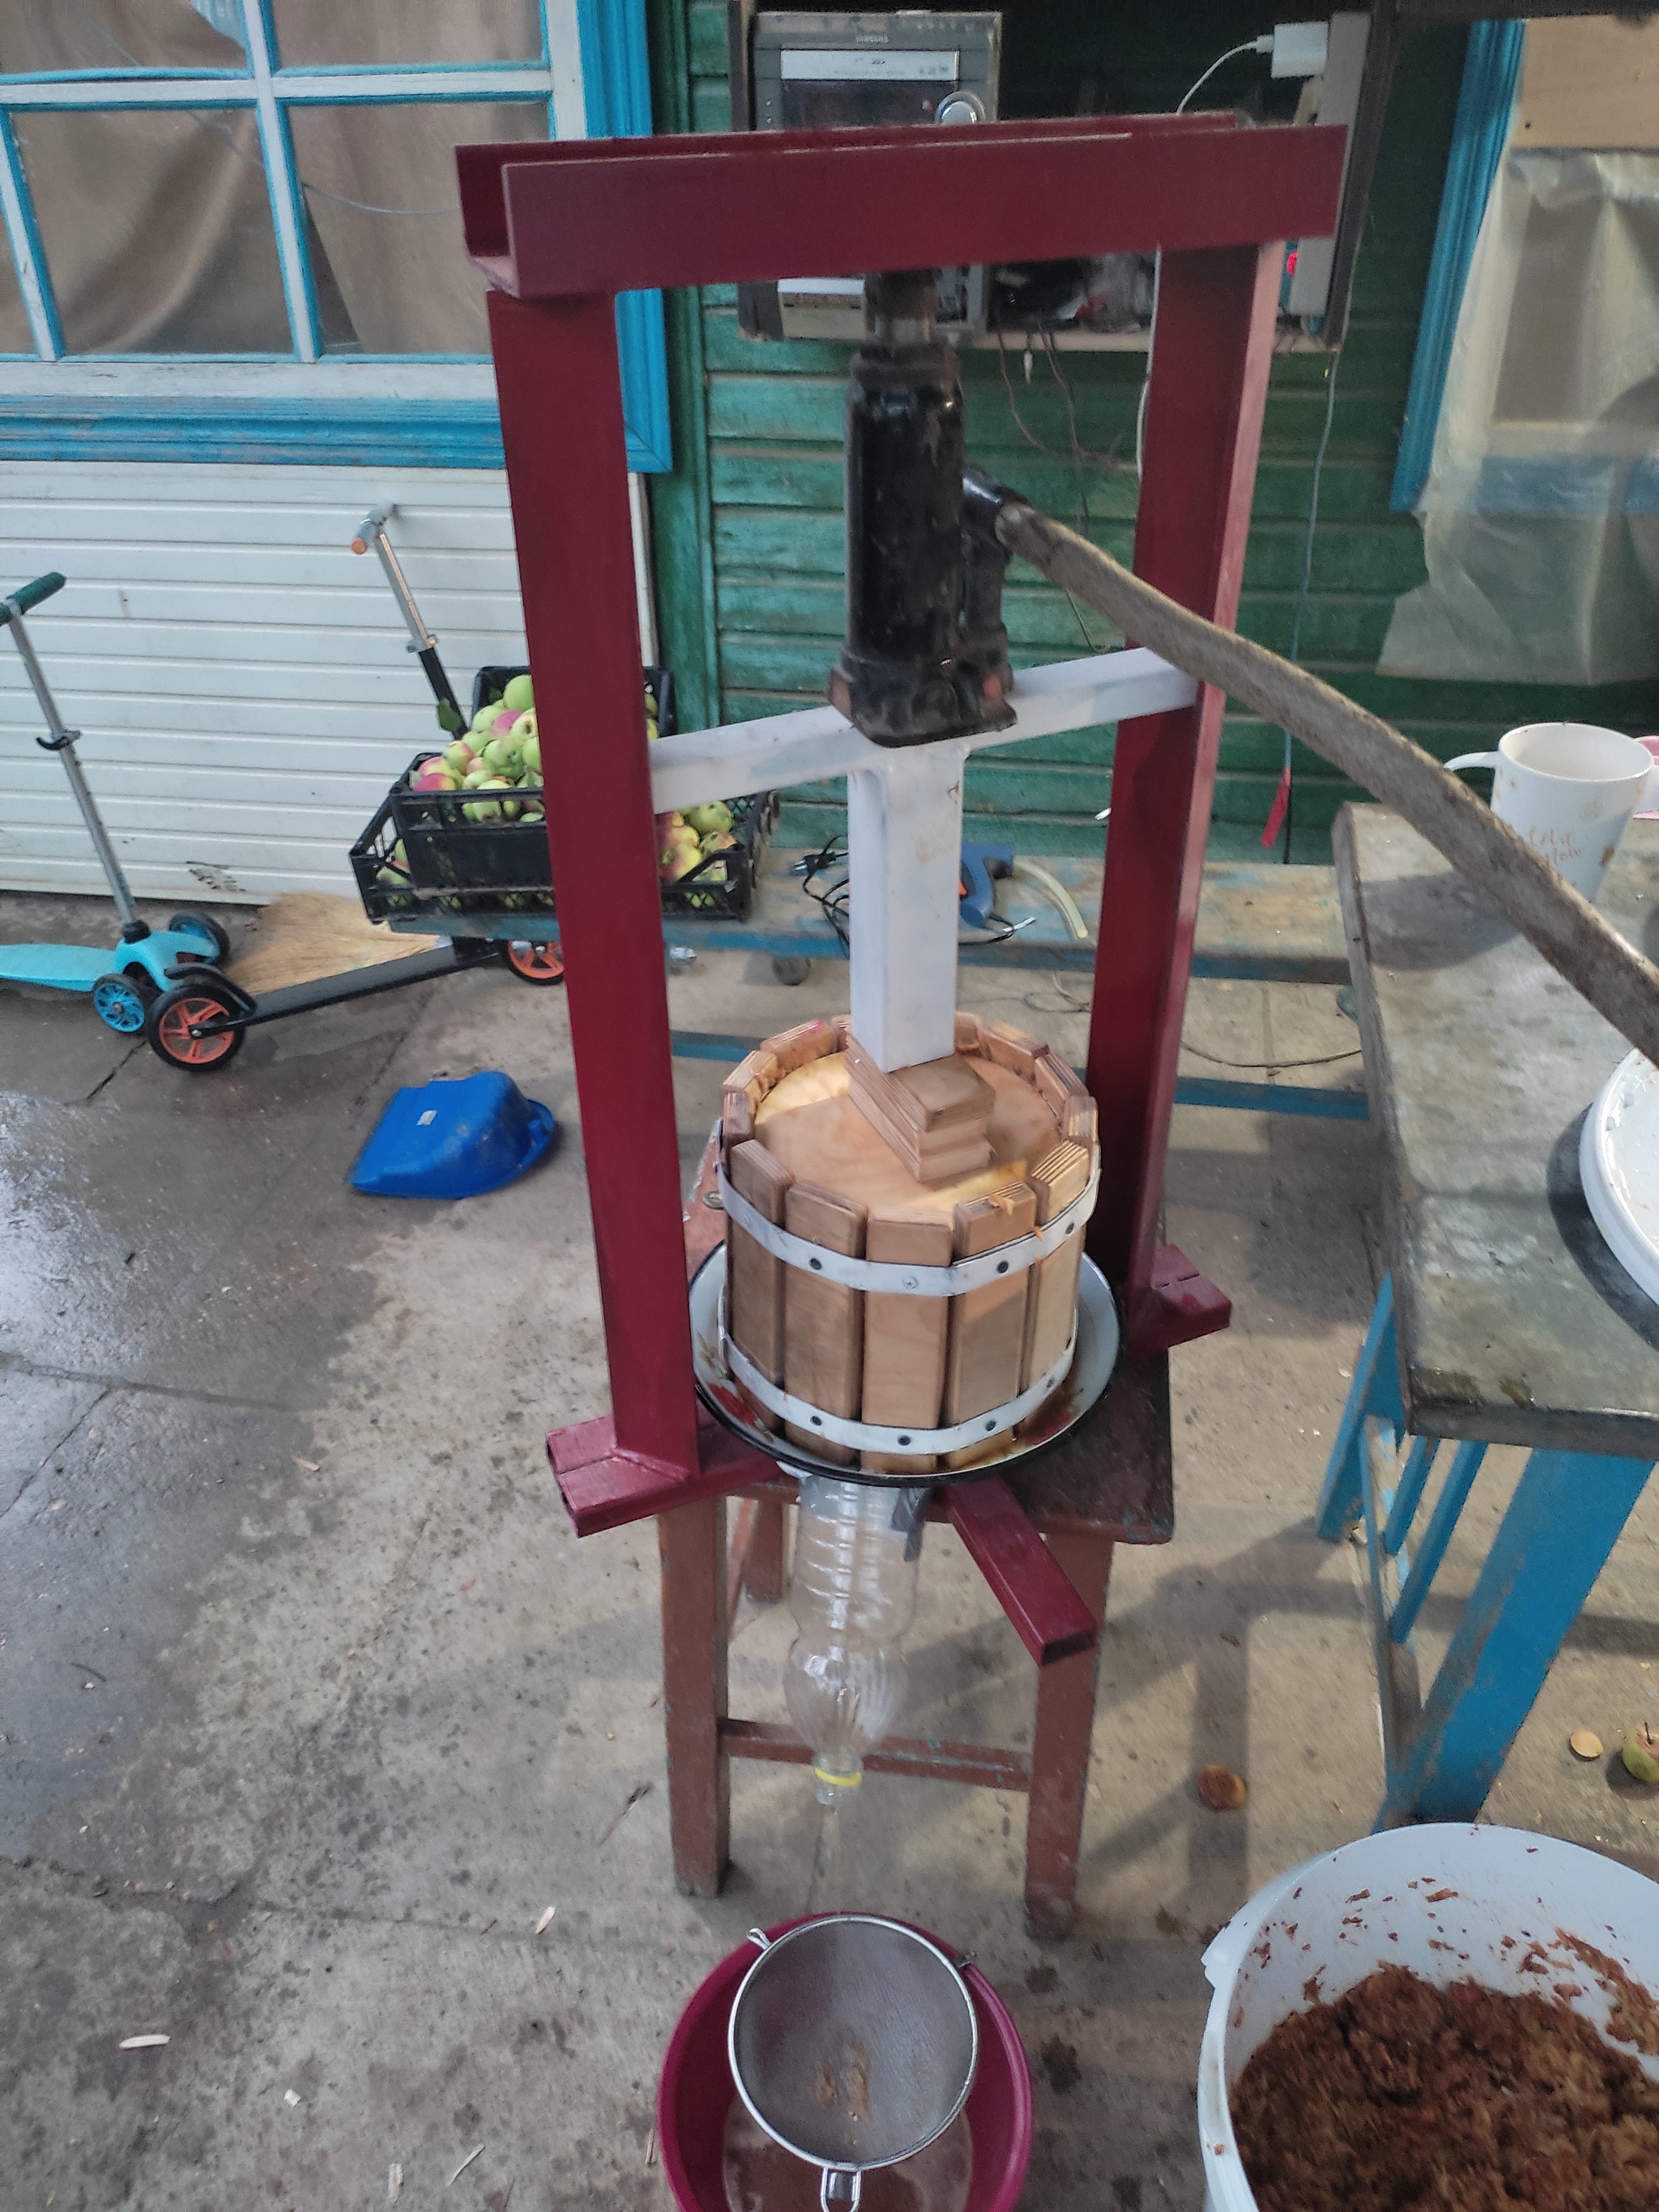 Apple Press - My, Press, Cider, Calvados, Apples, Home brewing, Longpost, With your own hands, Needlework with process, The photo